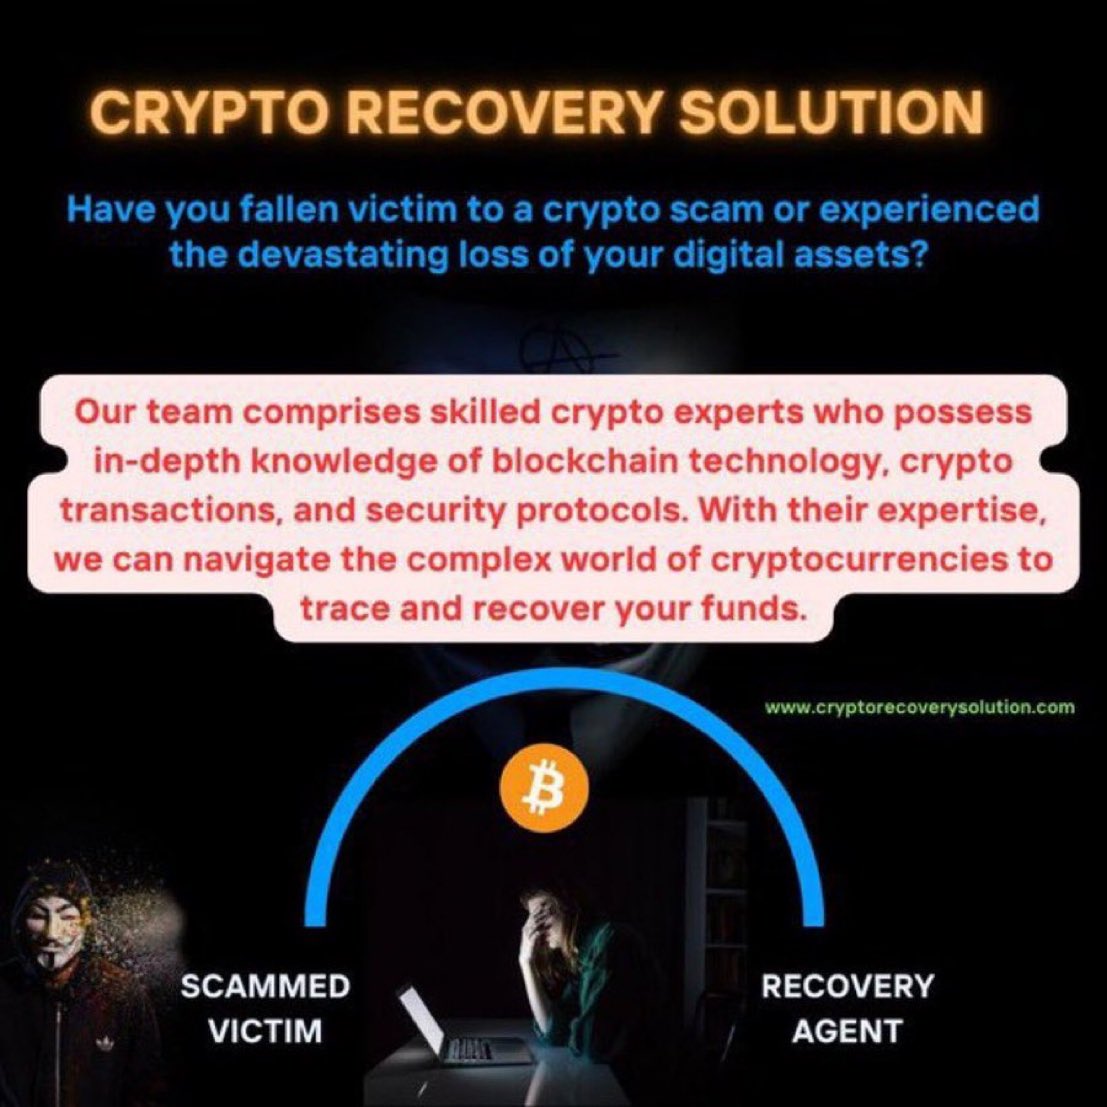 Experiencing any of these challenges?
- Issues with #Coinappcrypto and #Astrofx
- Compromised wallet security
- Frozen funds
- Accidental fund transfers

Feel free to reach out to us for assistance. #Hacked #EEYC #3EXPM #3EX_PM #EEYCwd #Bist100 #NFT #Commaex #Imqf #upamp #yekf